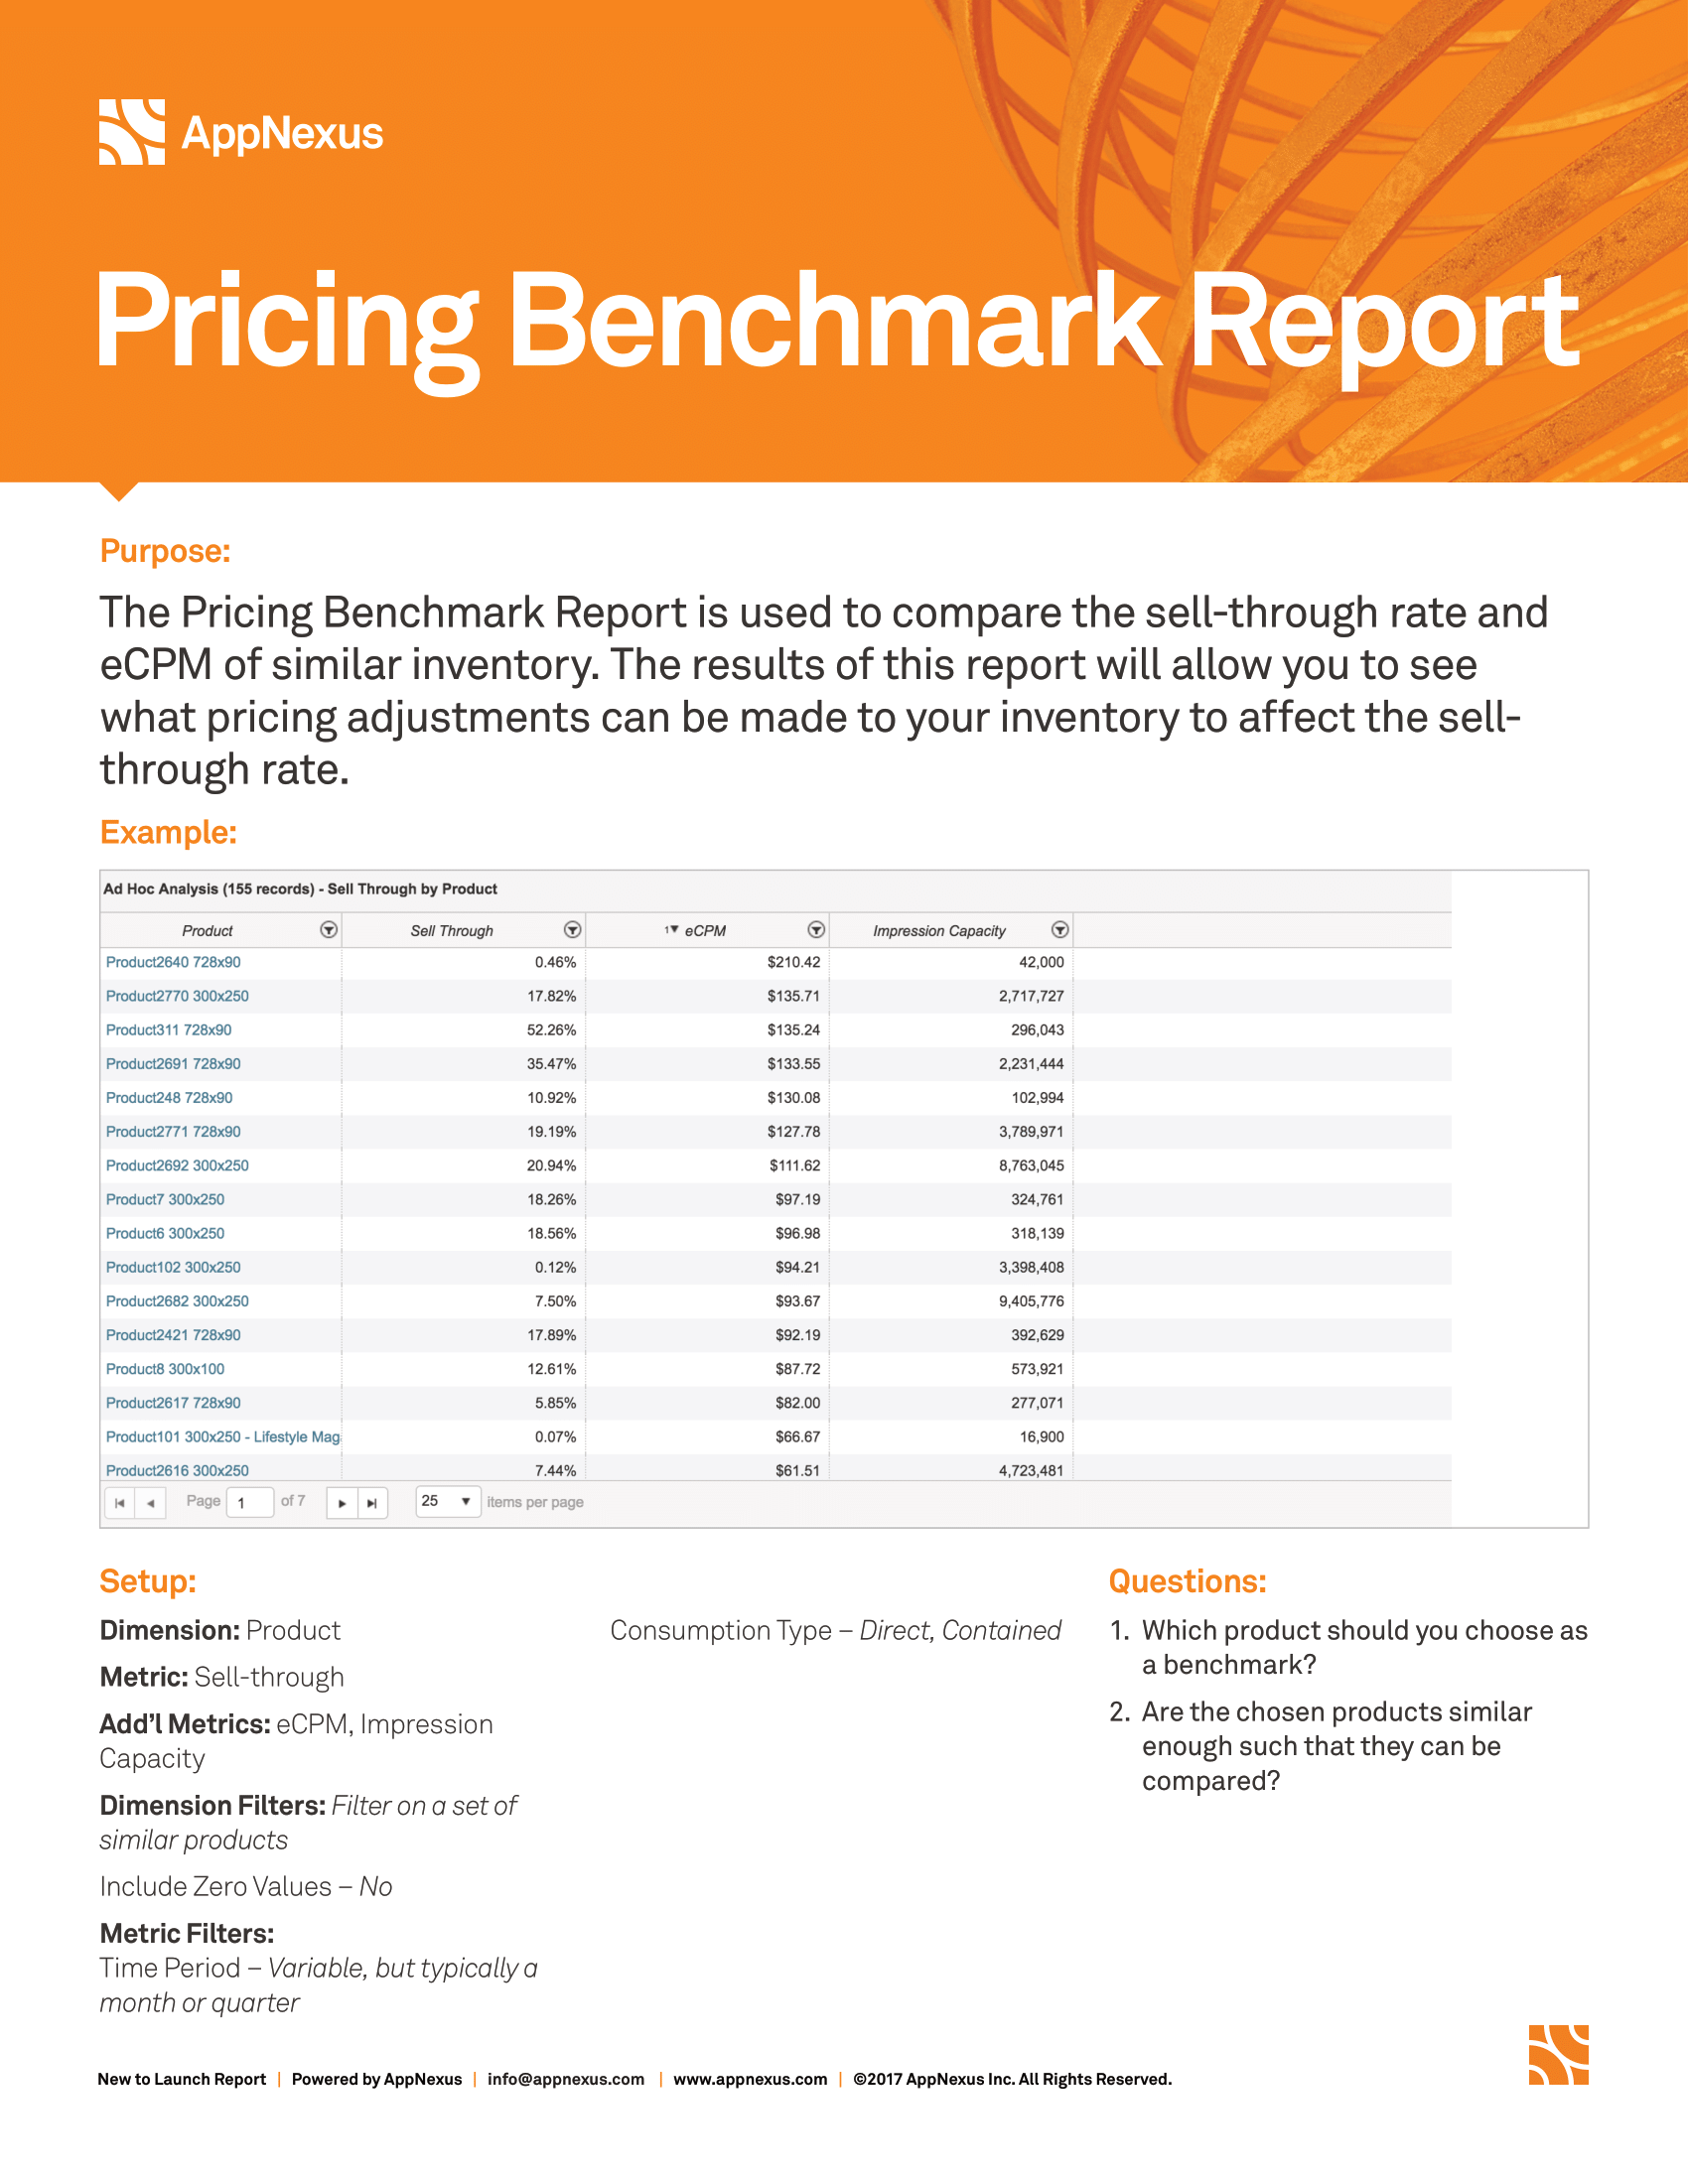 Screenshot that provides details about the Pricing Benchmark report.